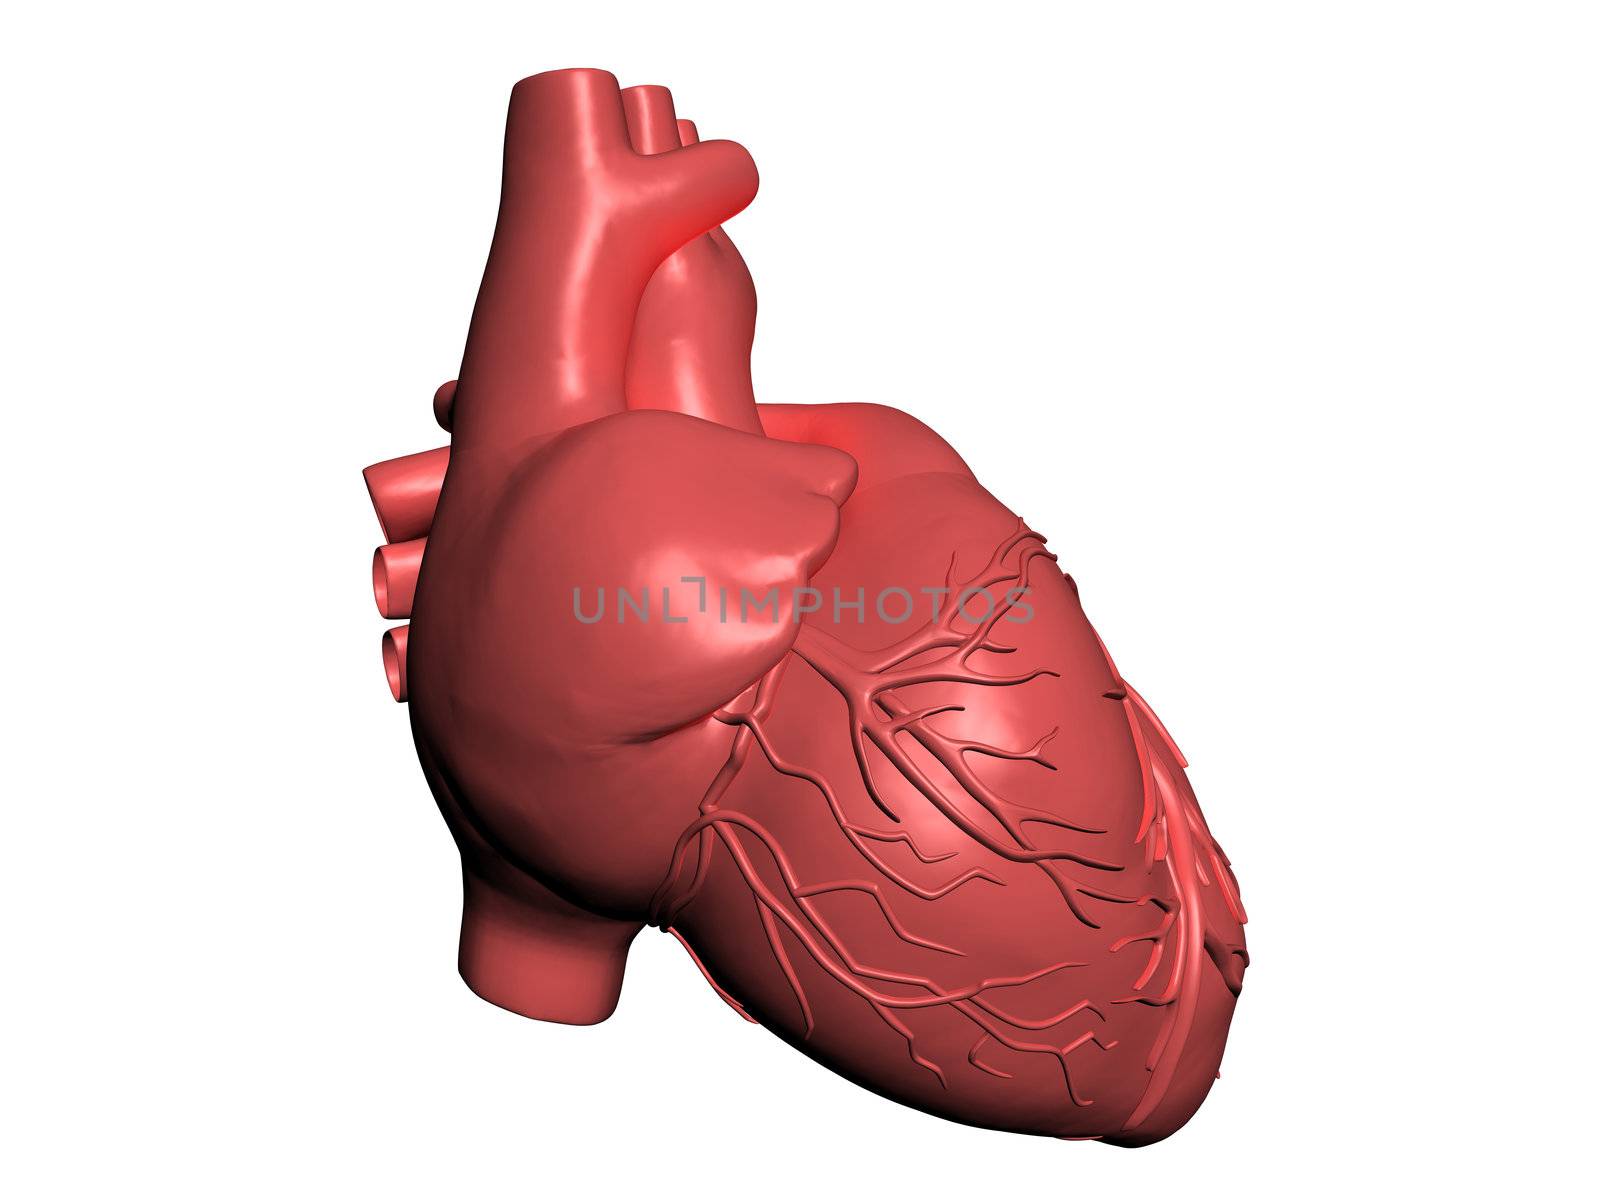 Model of human heart by andromeda13